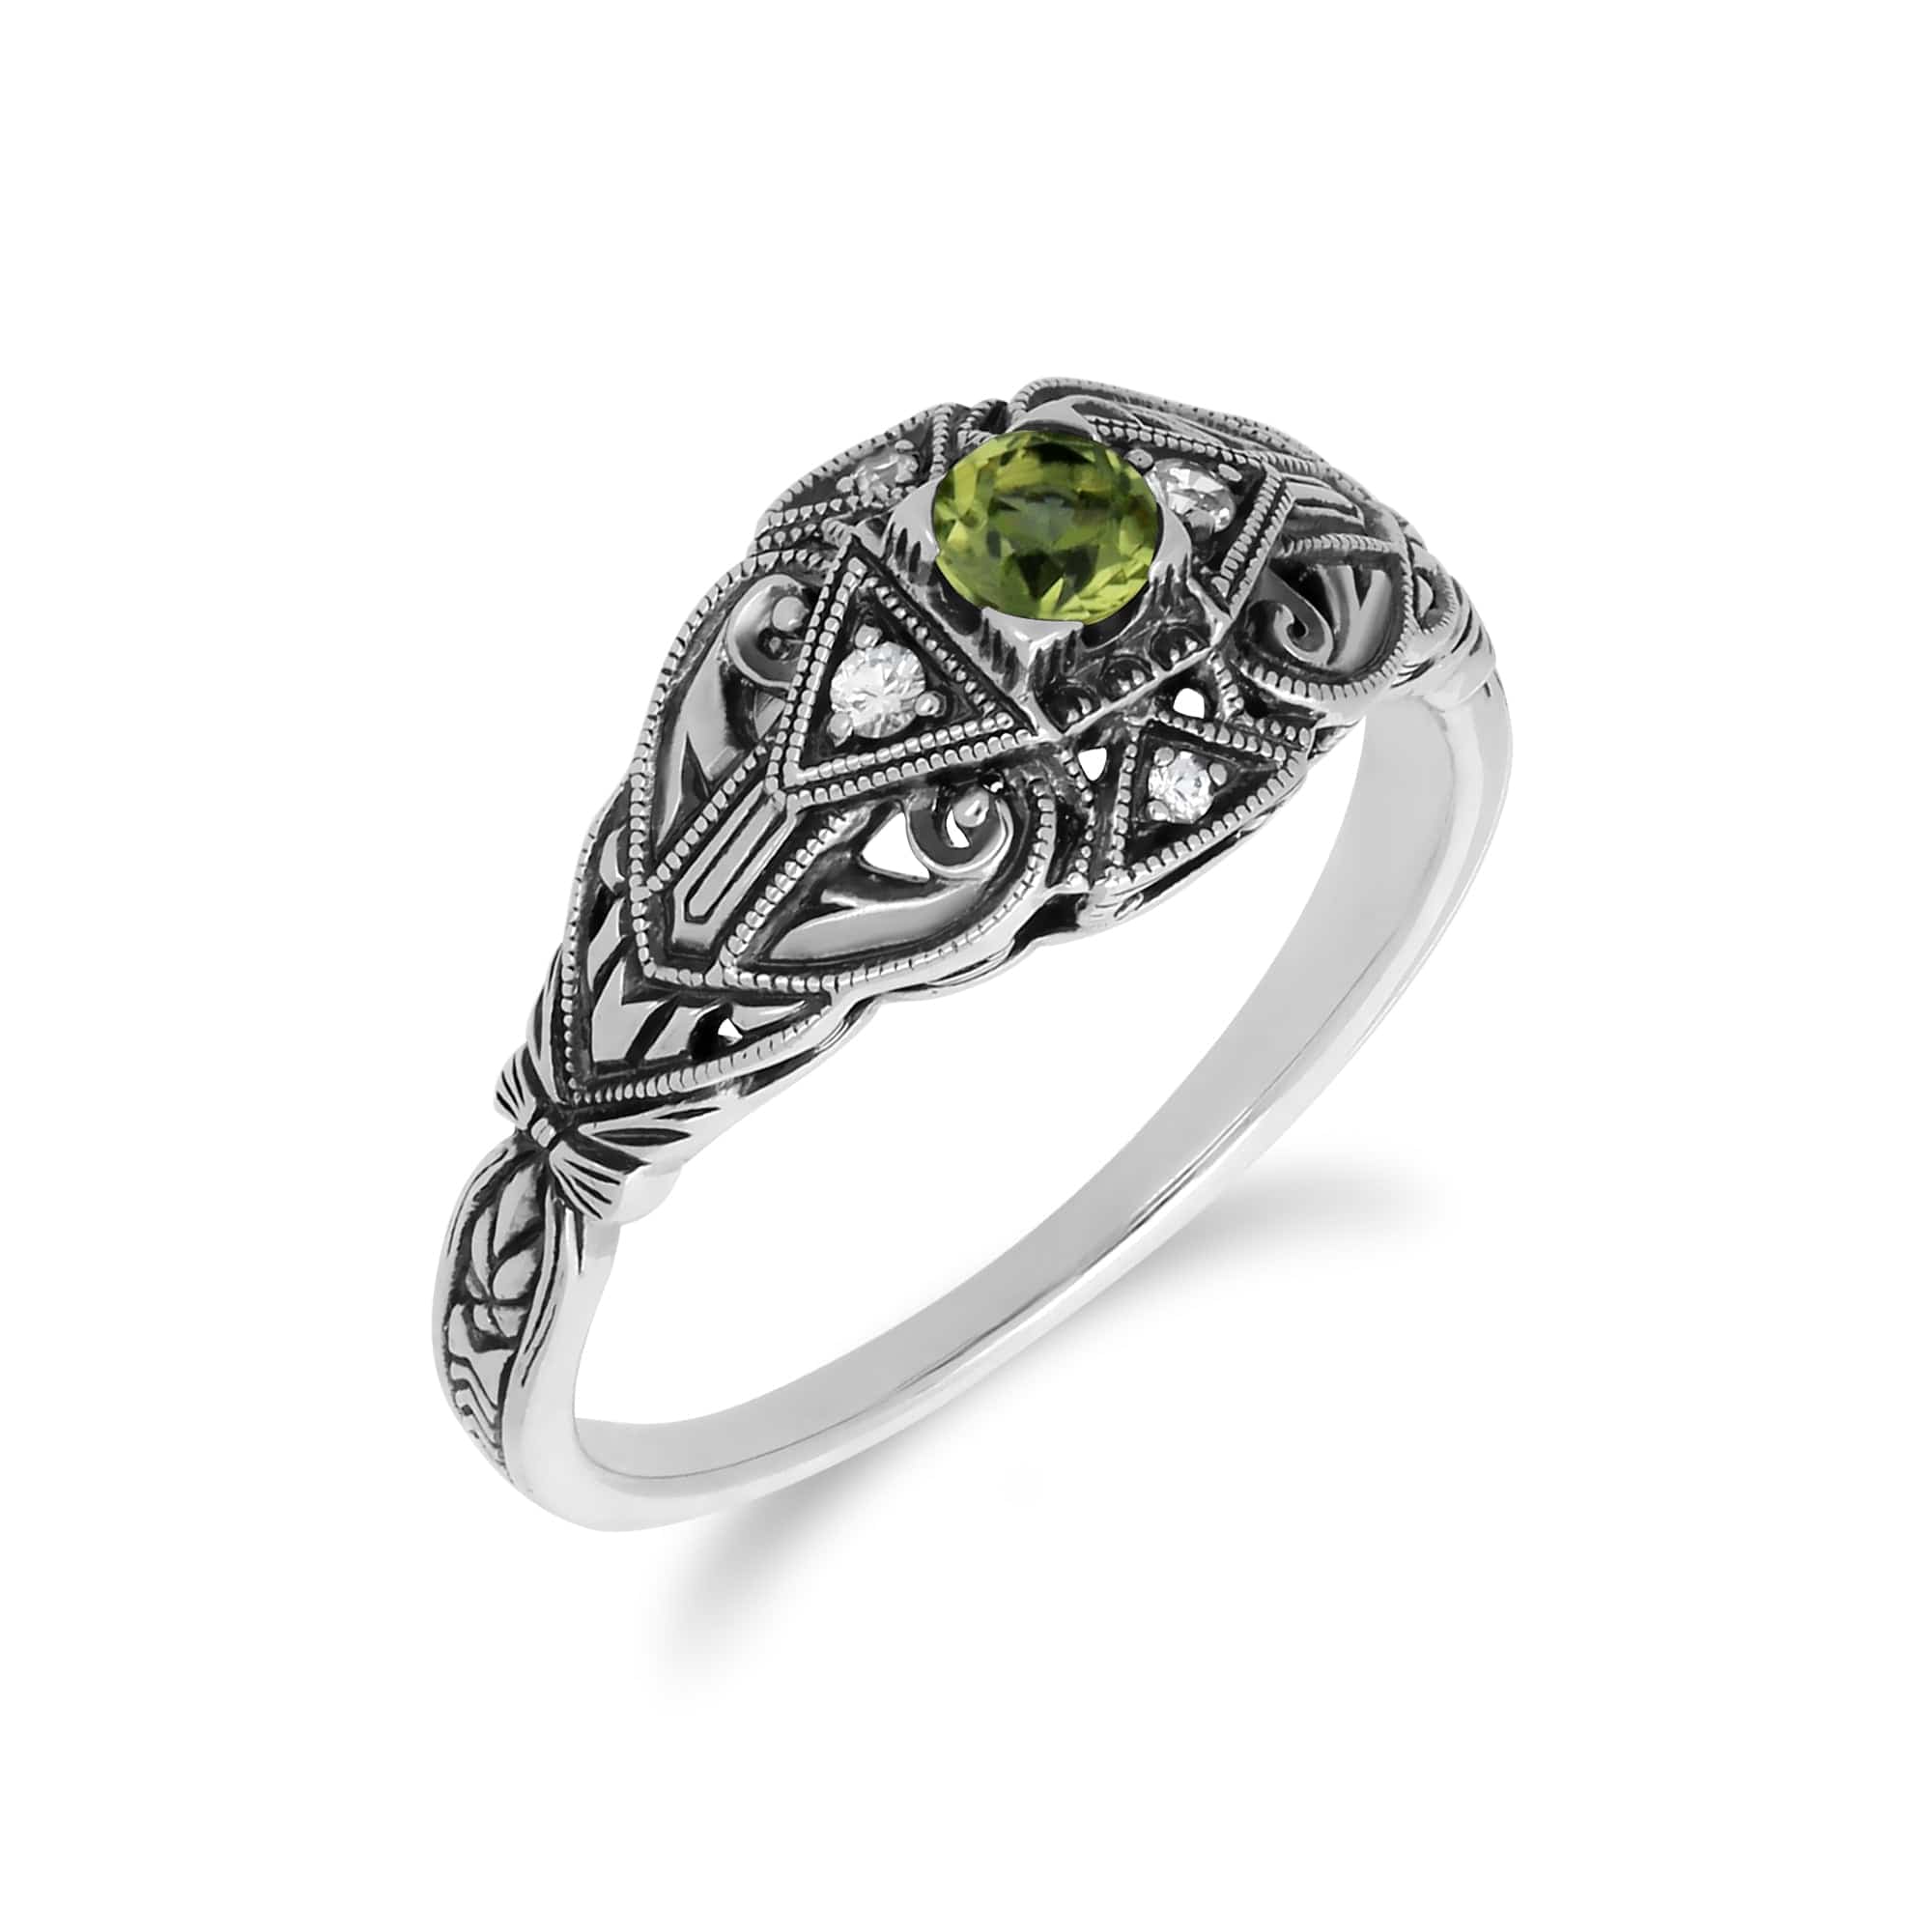 241R210304925 Art Deco Style Round Peridot & White Topaz  Ring in 925 Sterling Silver 2